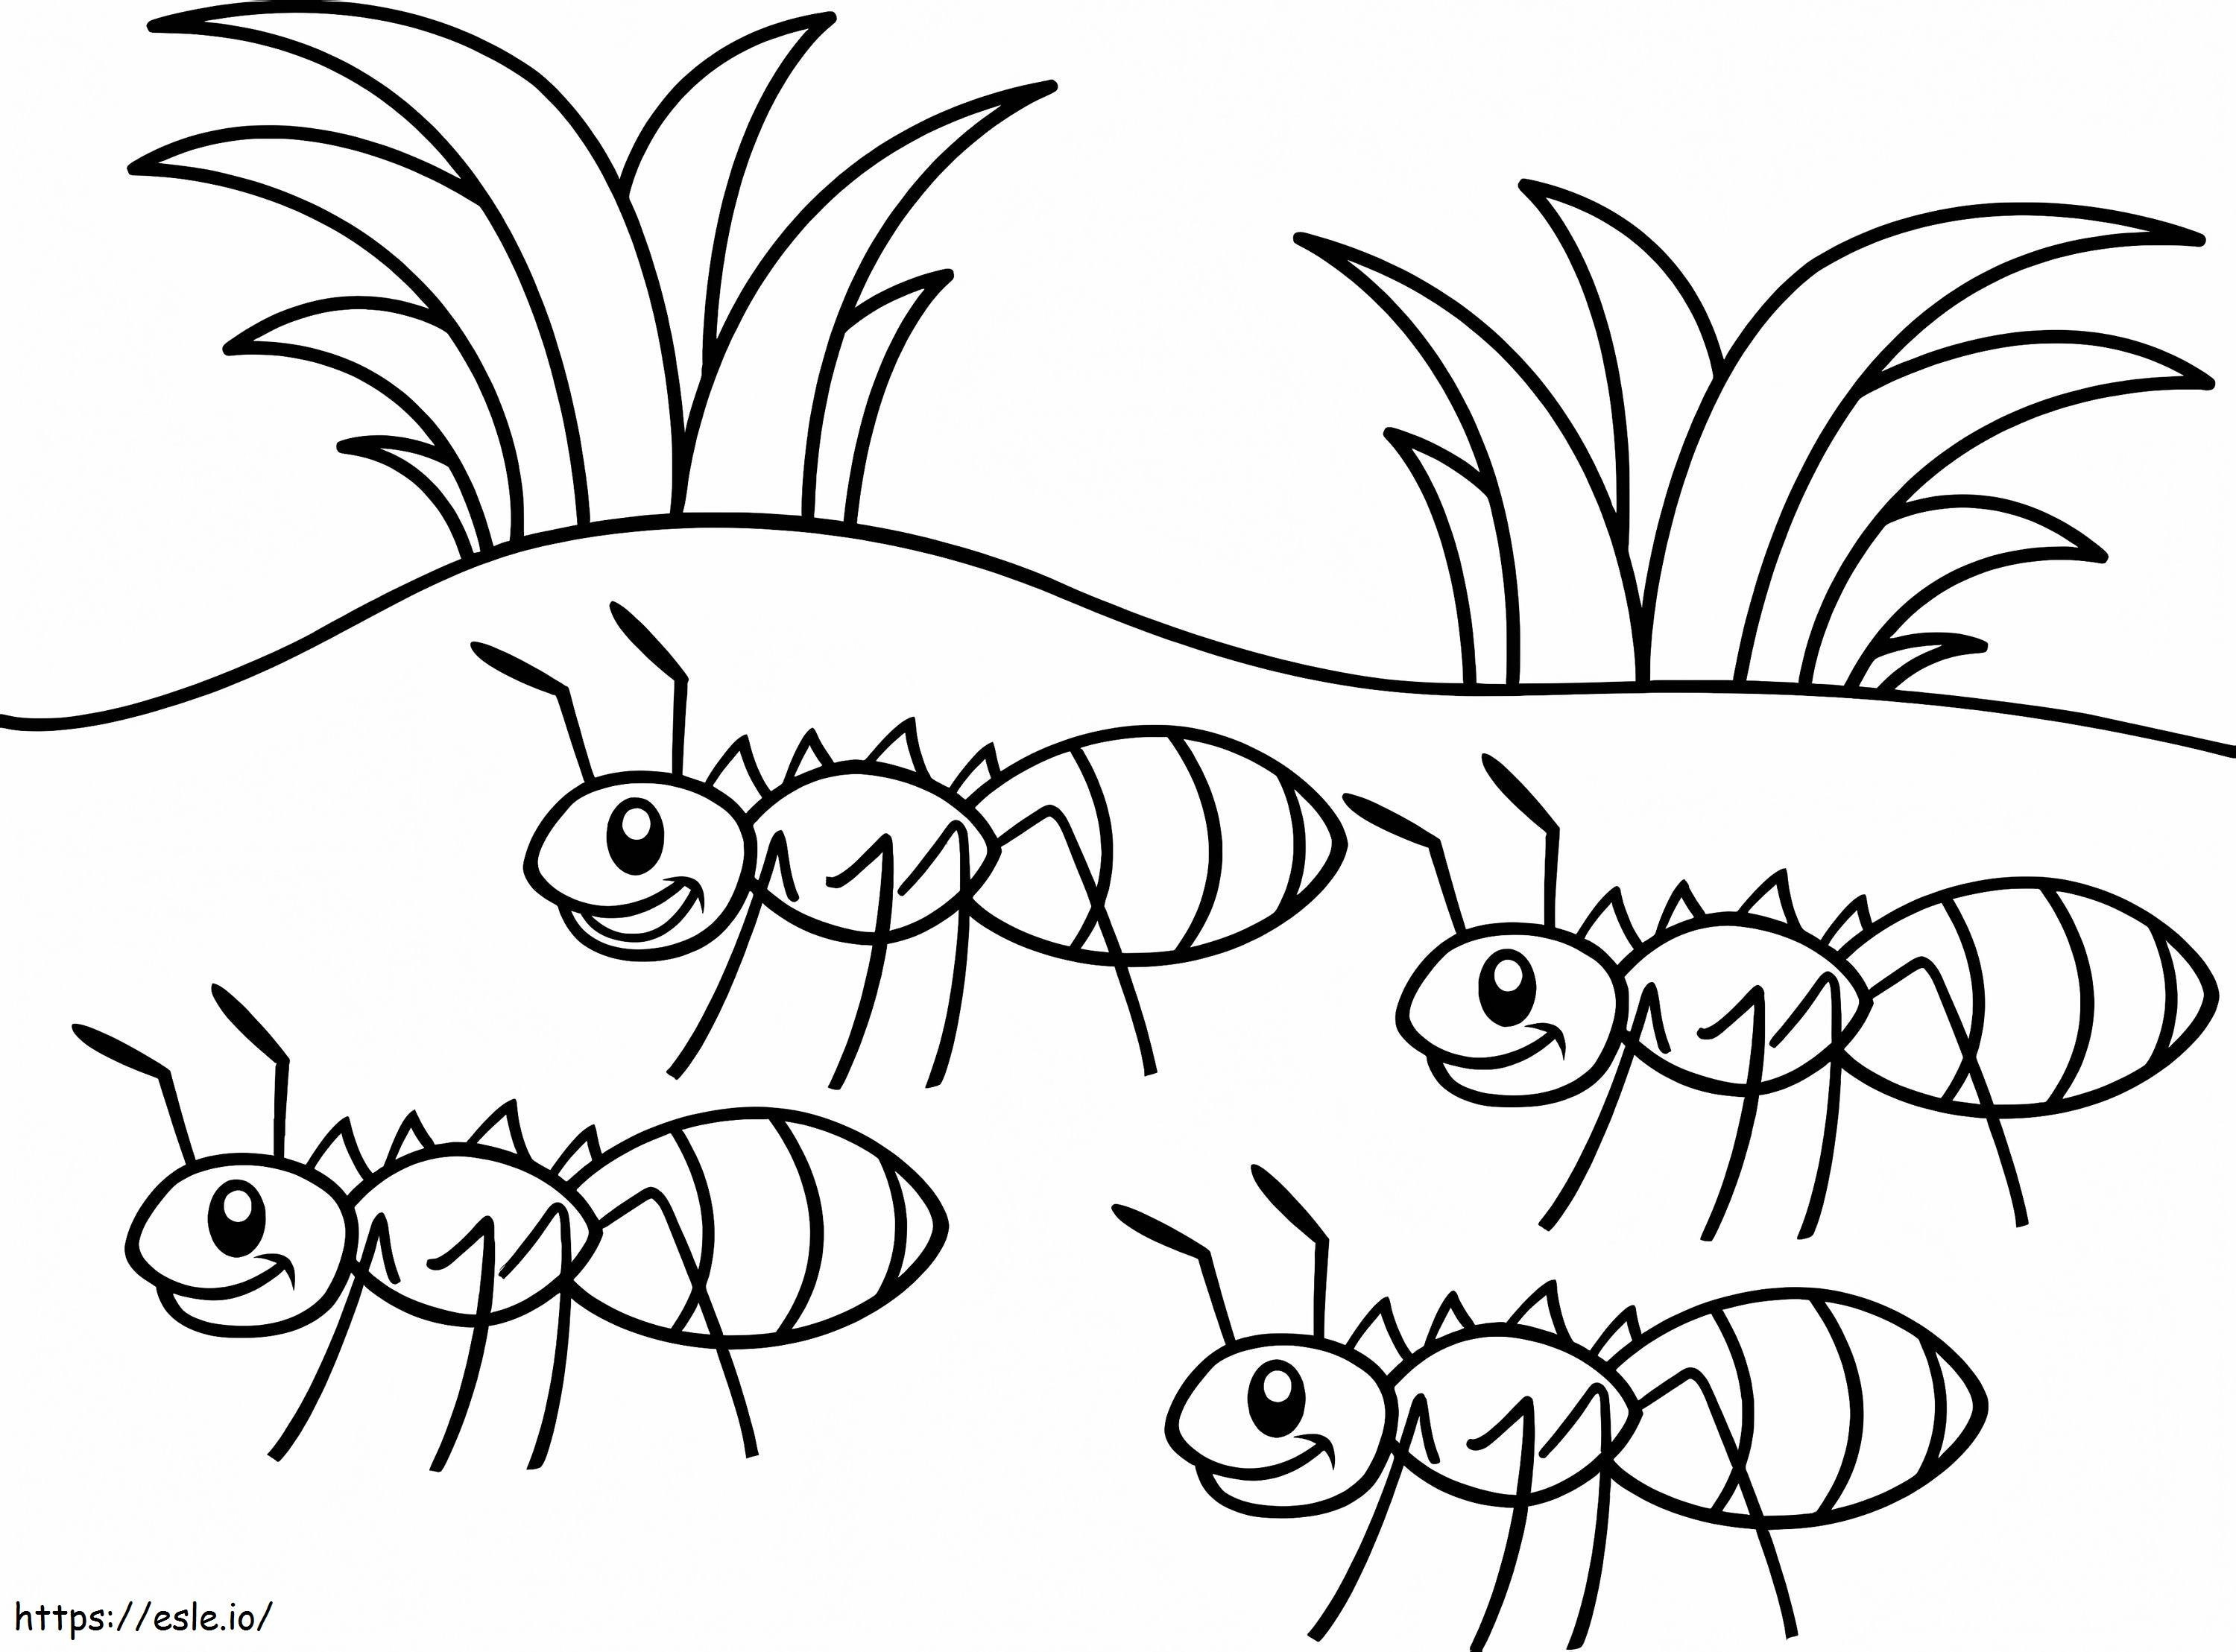 Four Ants coloring page